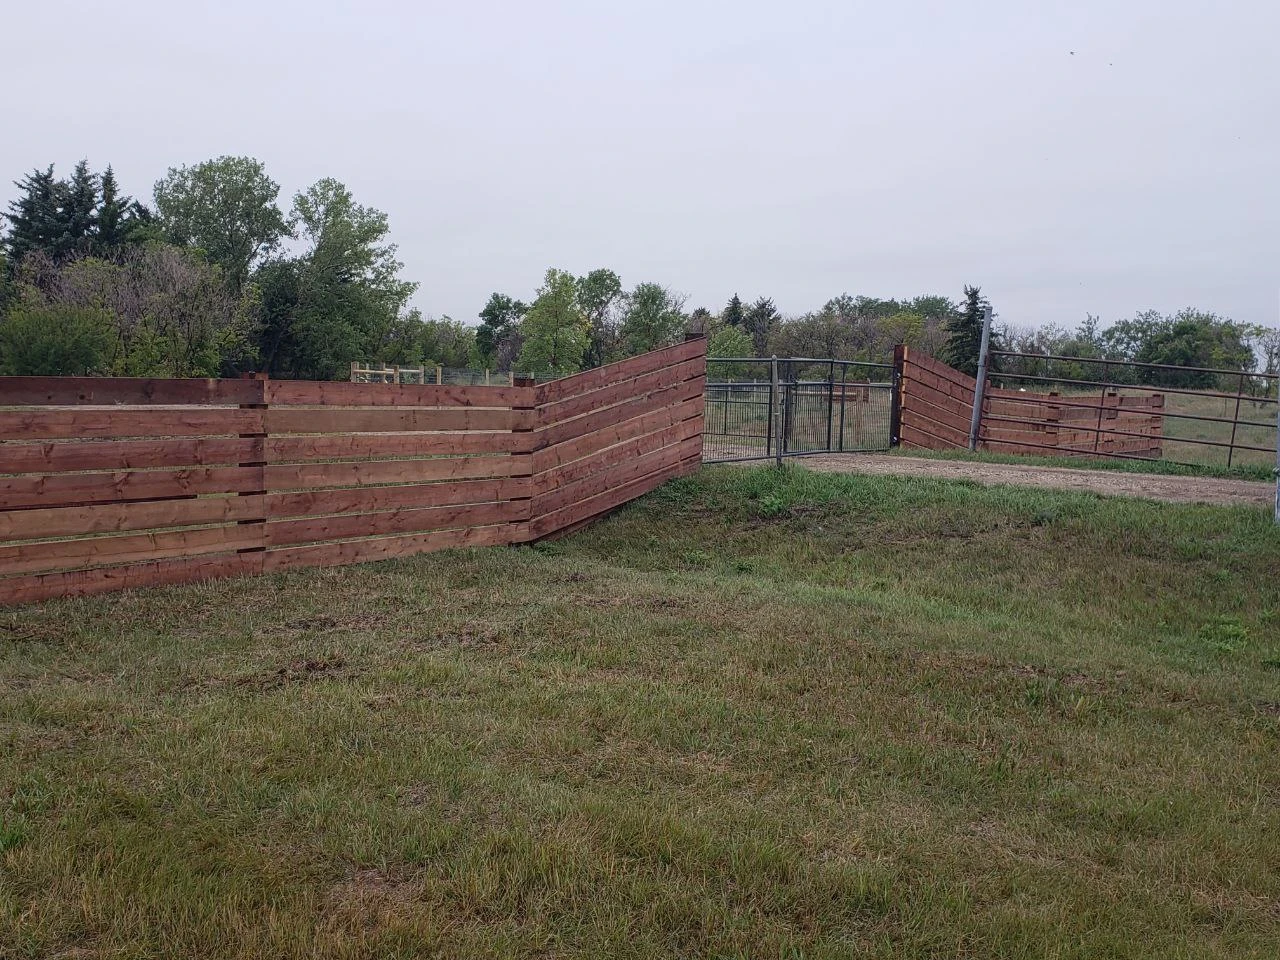 Do You Need Quality Fencing? Check Out Our Fencing Services